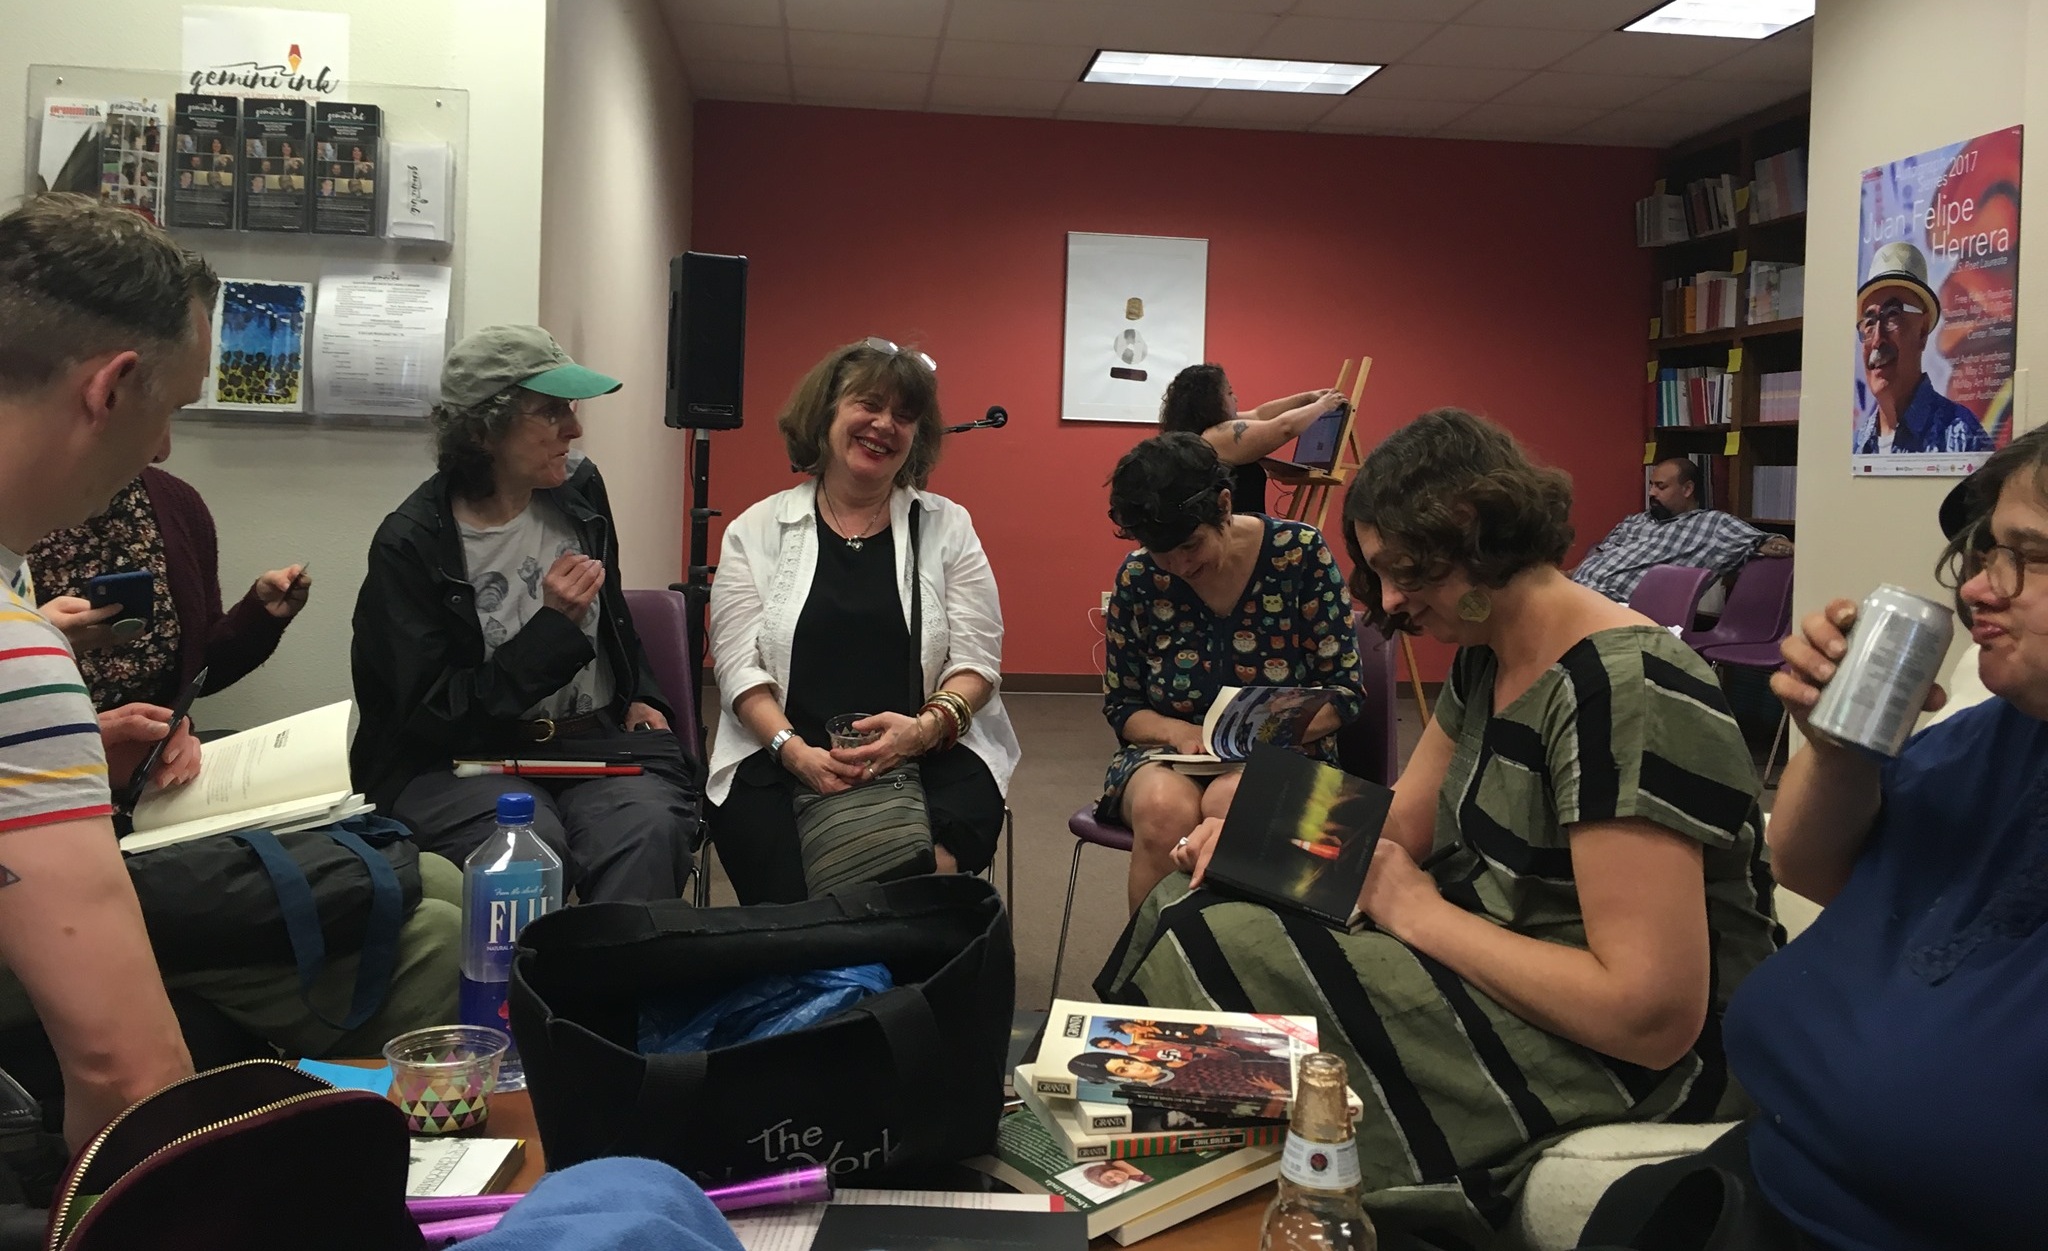                      2019 Conference participants talk and laugh while working in a small group at Gemini Ink in San Antonio, TX. 